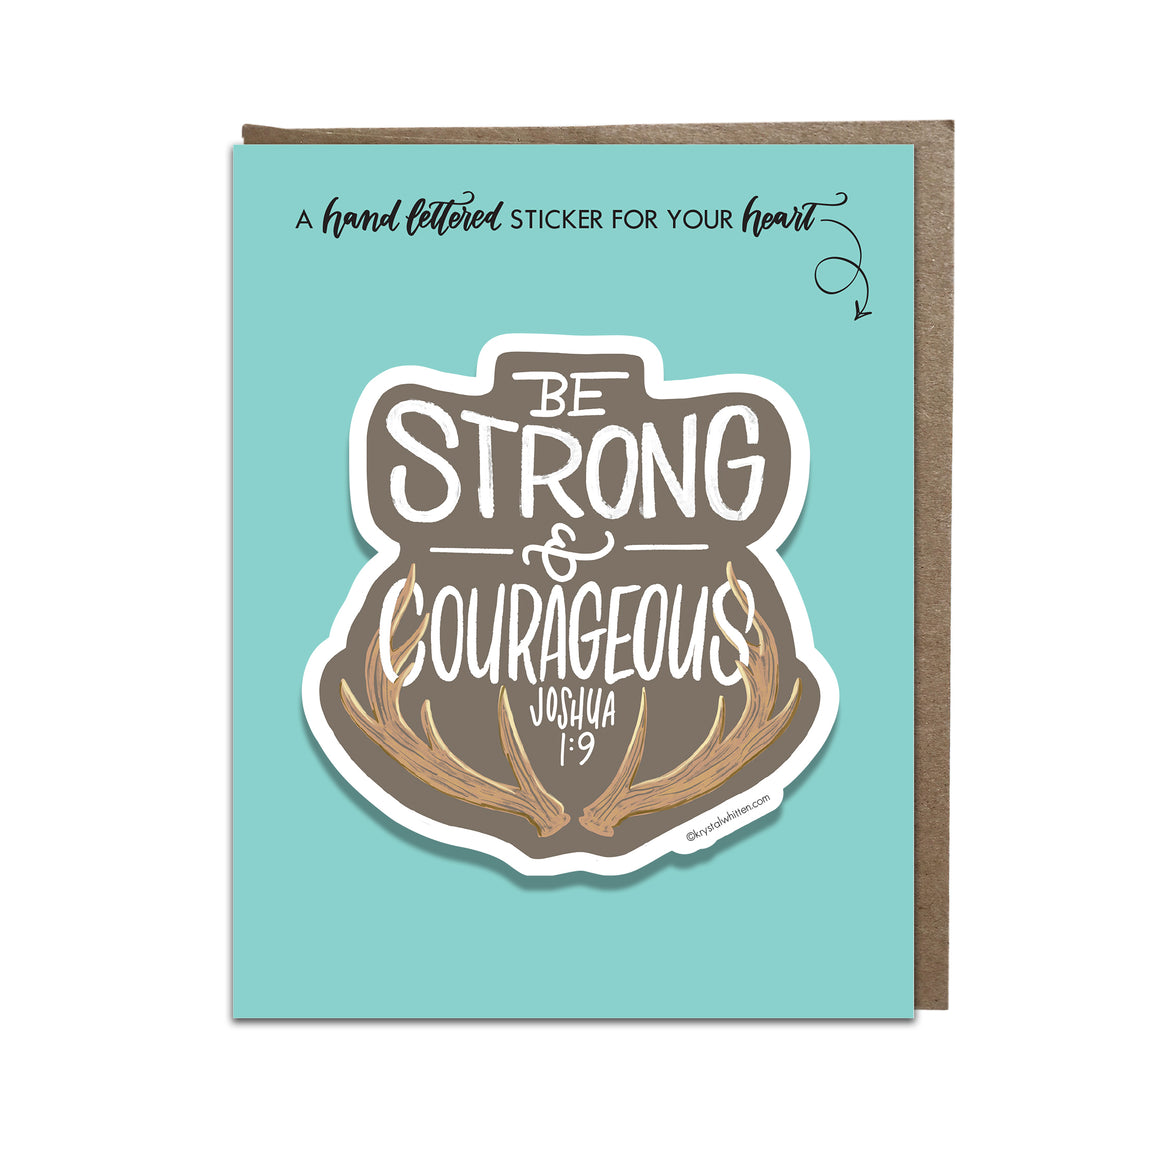 "Strong and Courageous" sticker card